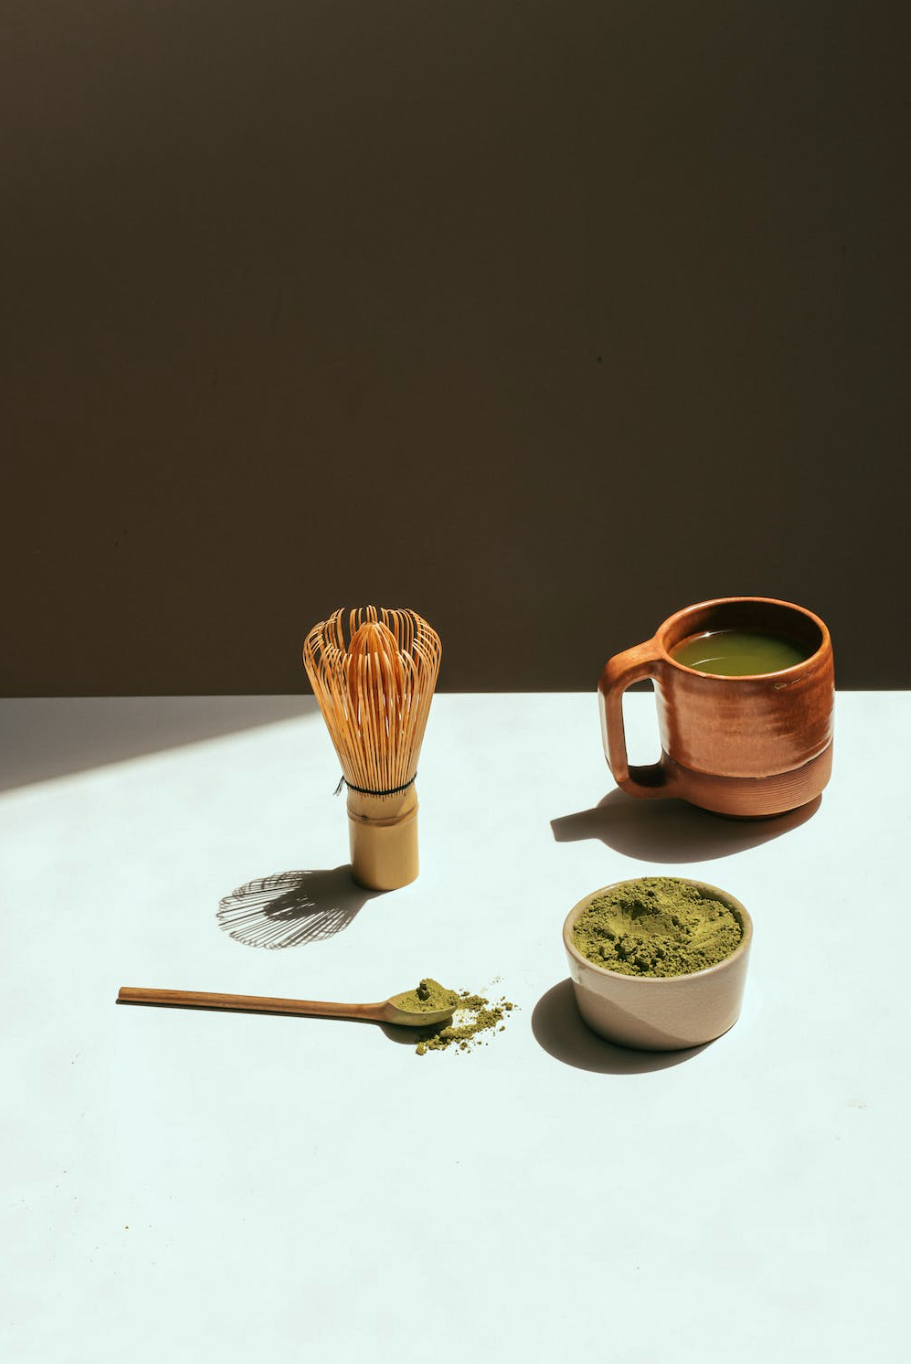 Is Matcha Good for You?